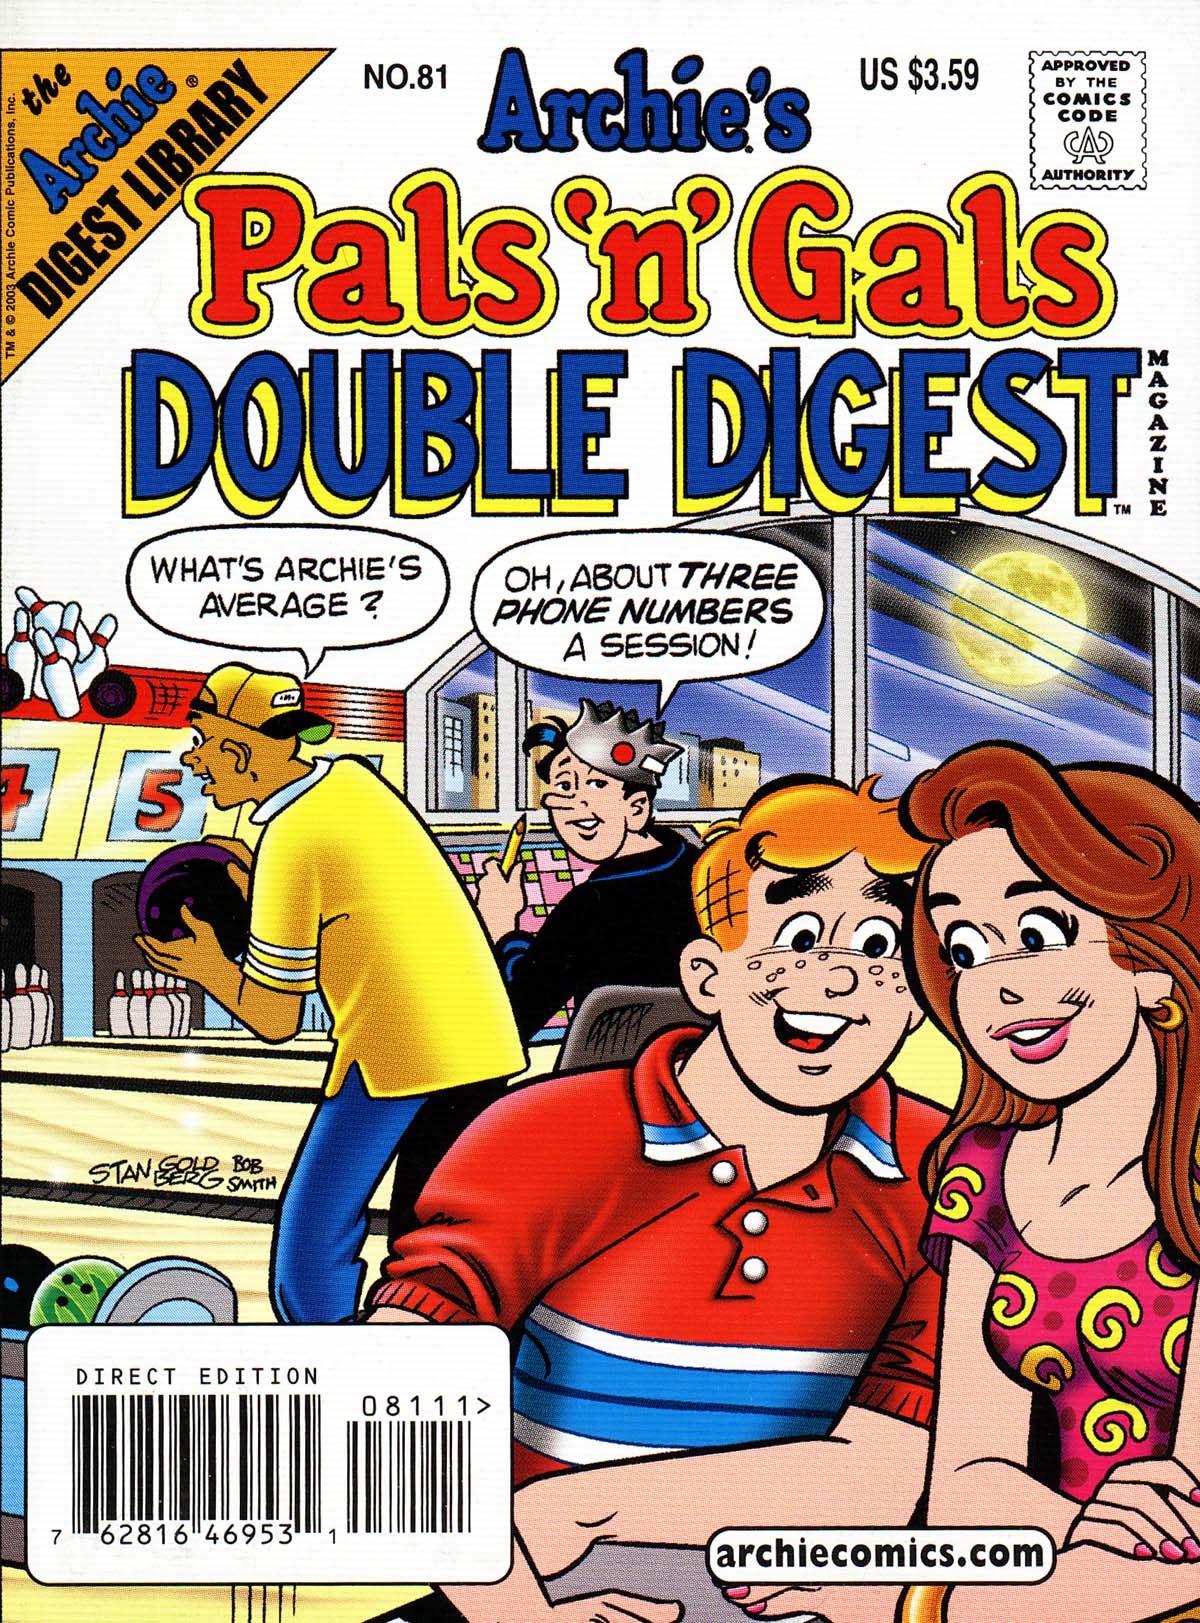 Archie's Pals 'n' Gals Double Digest Magazine issue 81 - Page 1